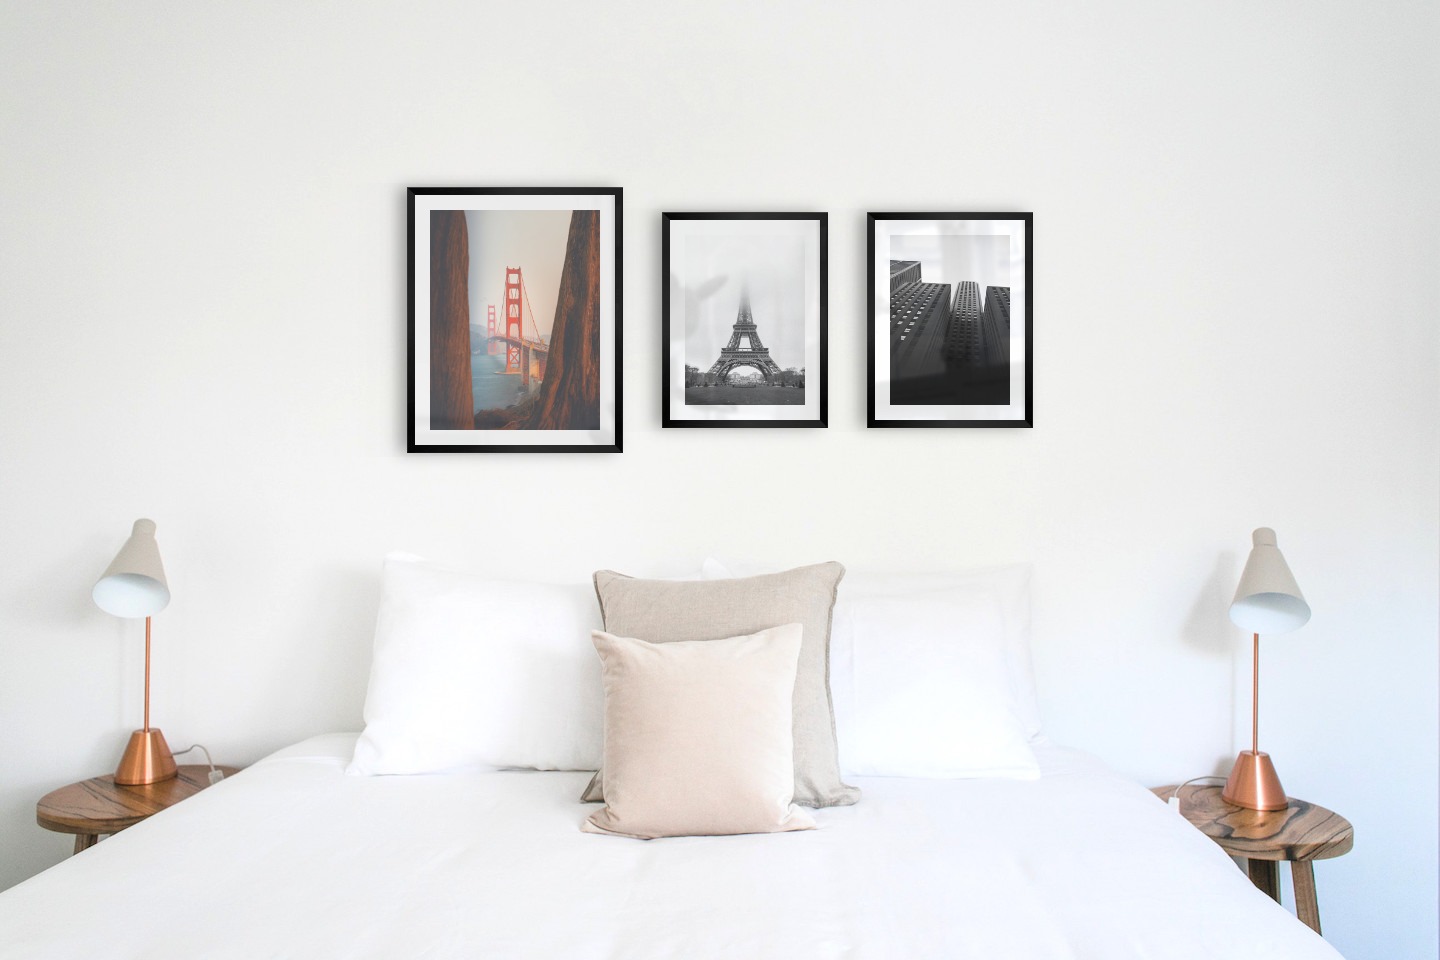 Gallery wall with picture frames in black in sizes 40x50 and 30x40 with prints "Golden Gate Bridge", "Eifel tower with fog" and "High buildings"